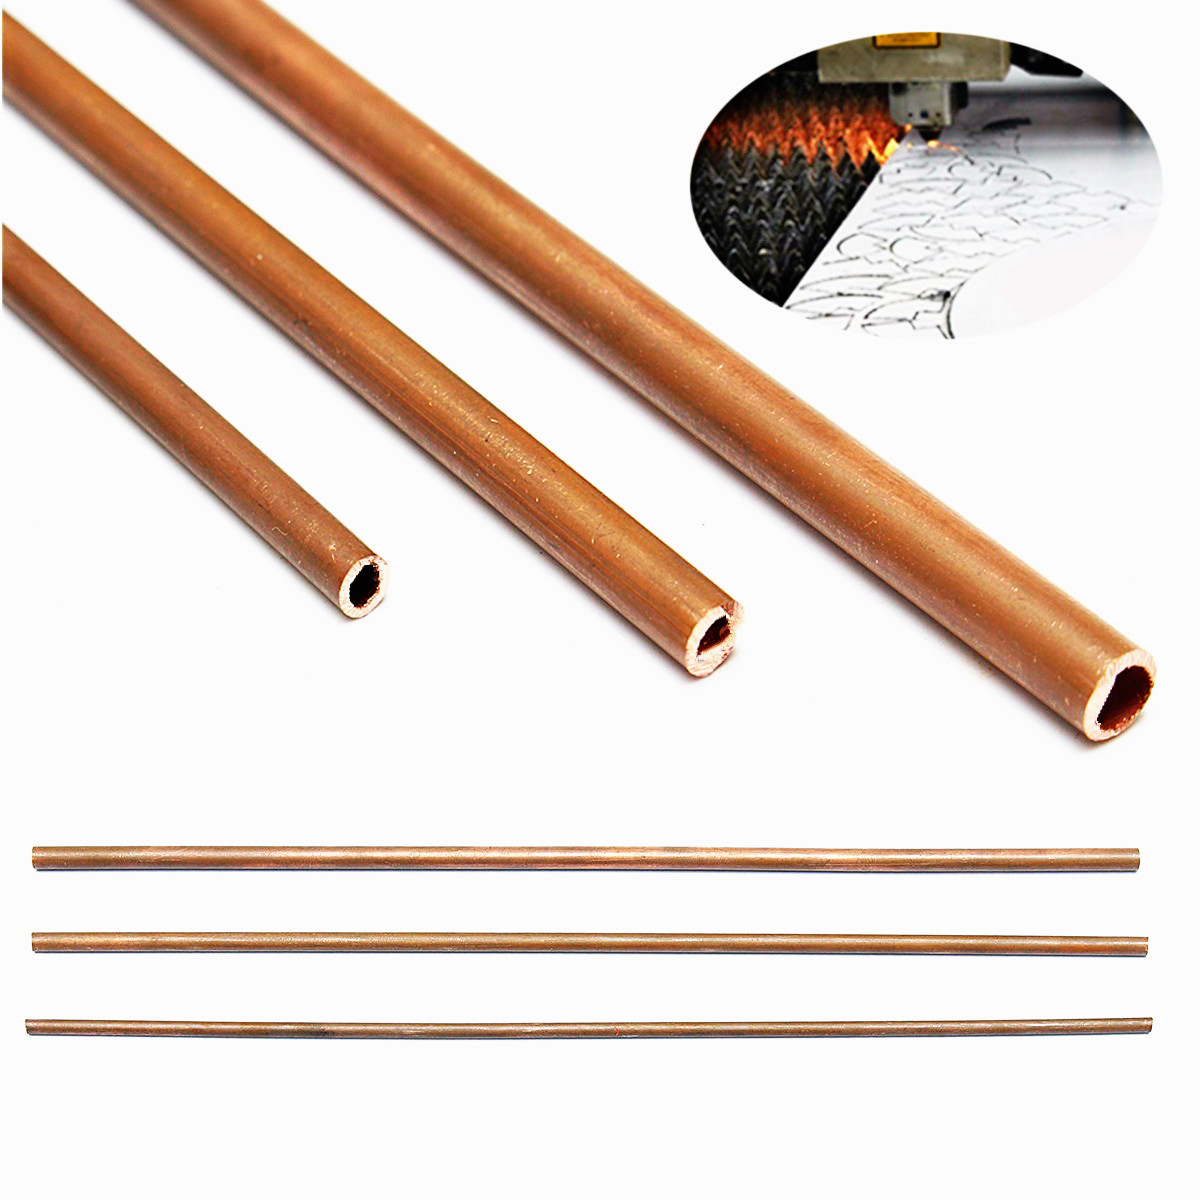 2M Soft Copper Tube Pipe OD 4mm X ID 3mm For Refrigeration Plumbing Welding DIY 